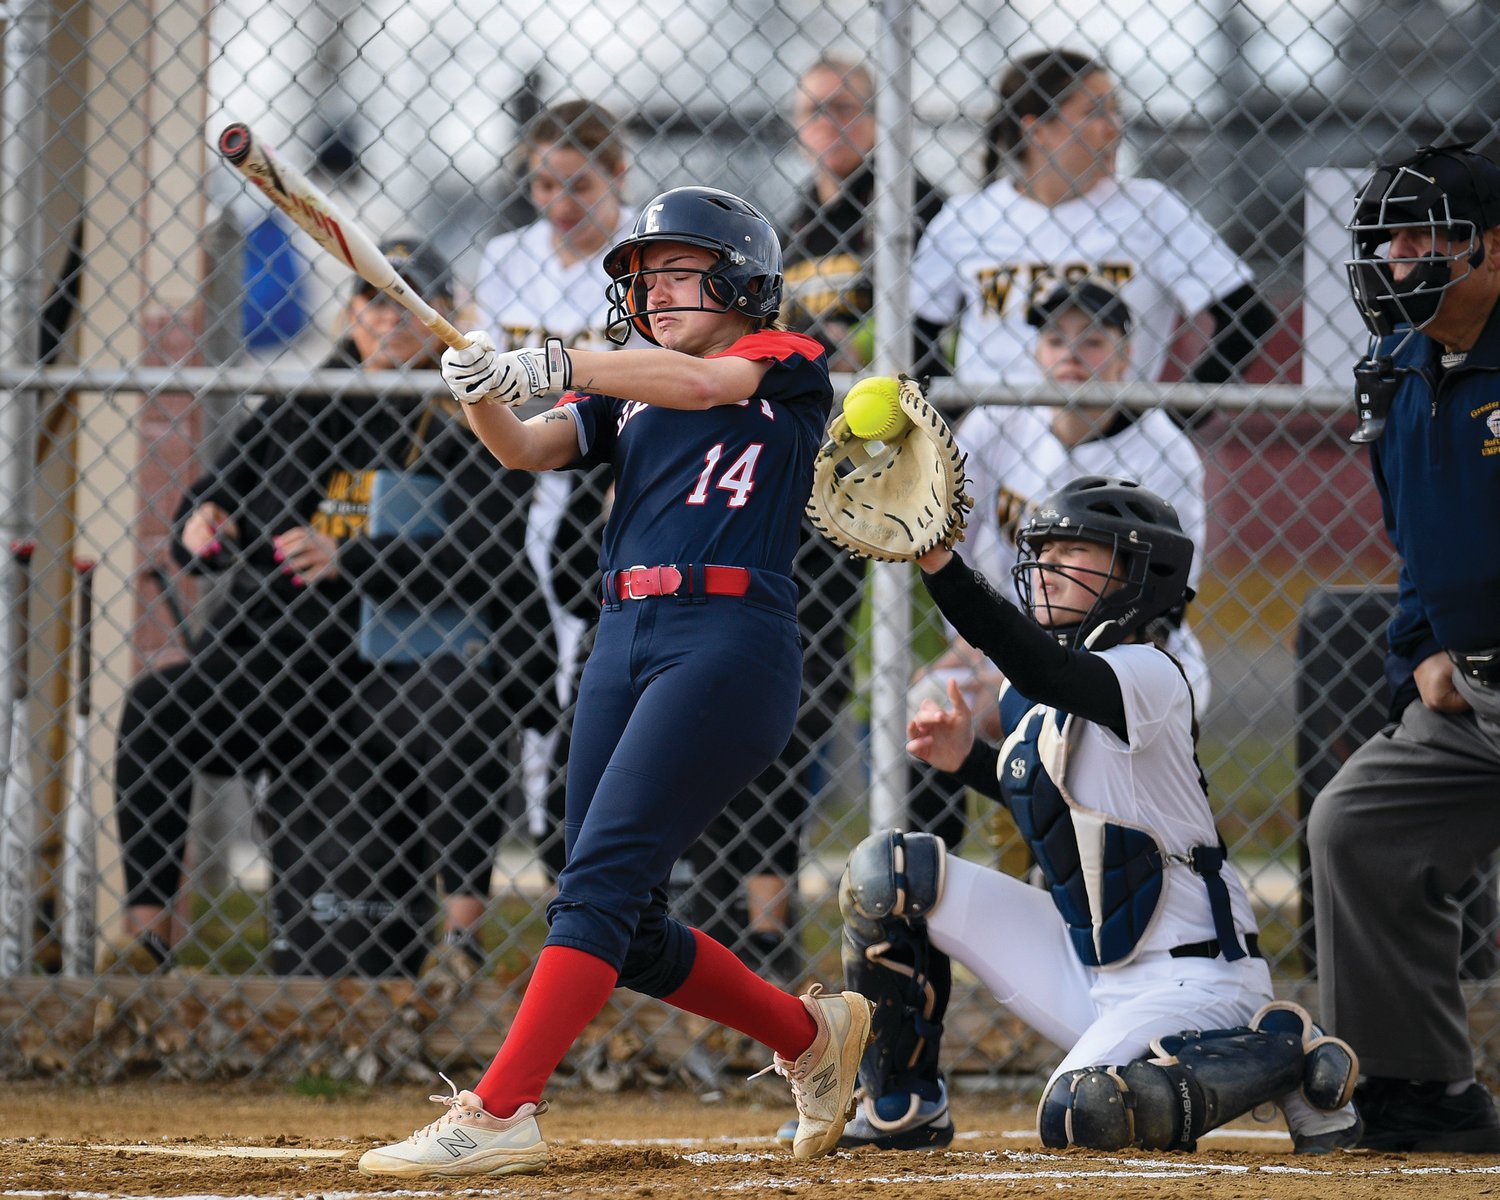 CB East’s Ava Catron can’t catch up to a fastball from CB West pitcher Sienna Lawson.